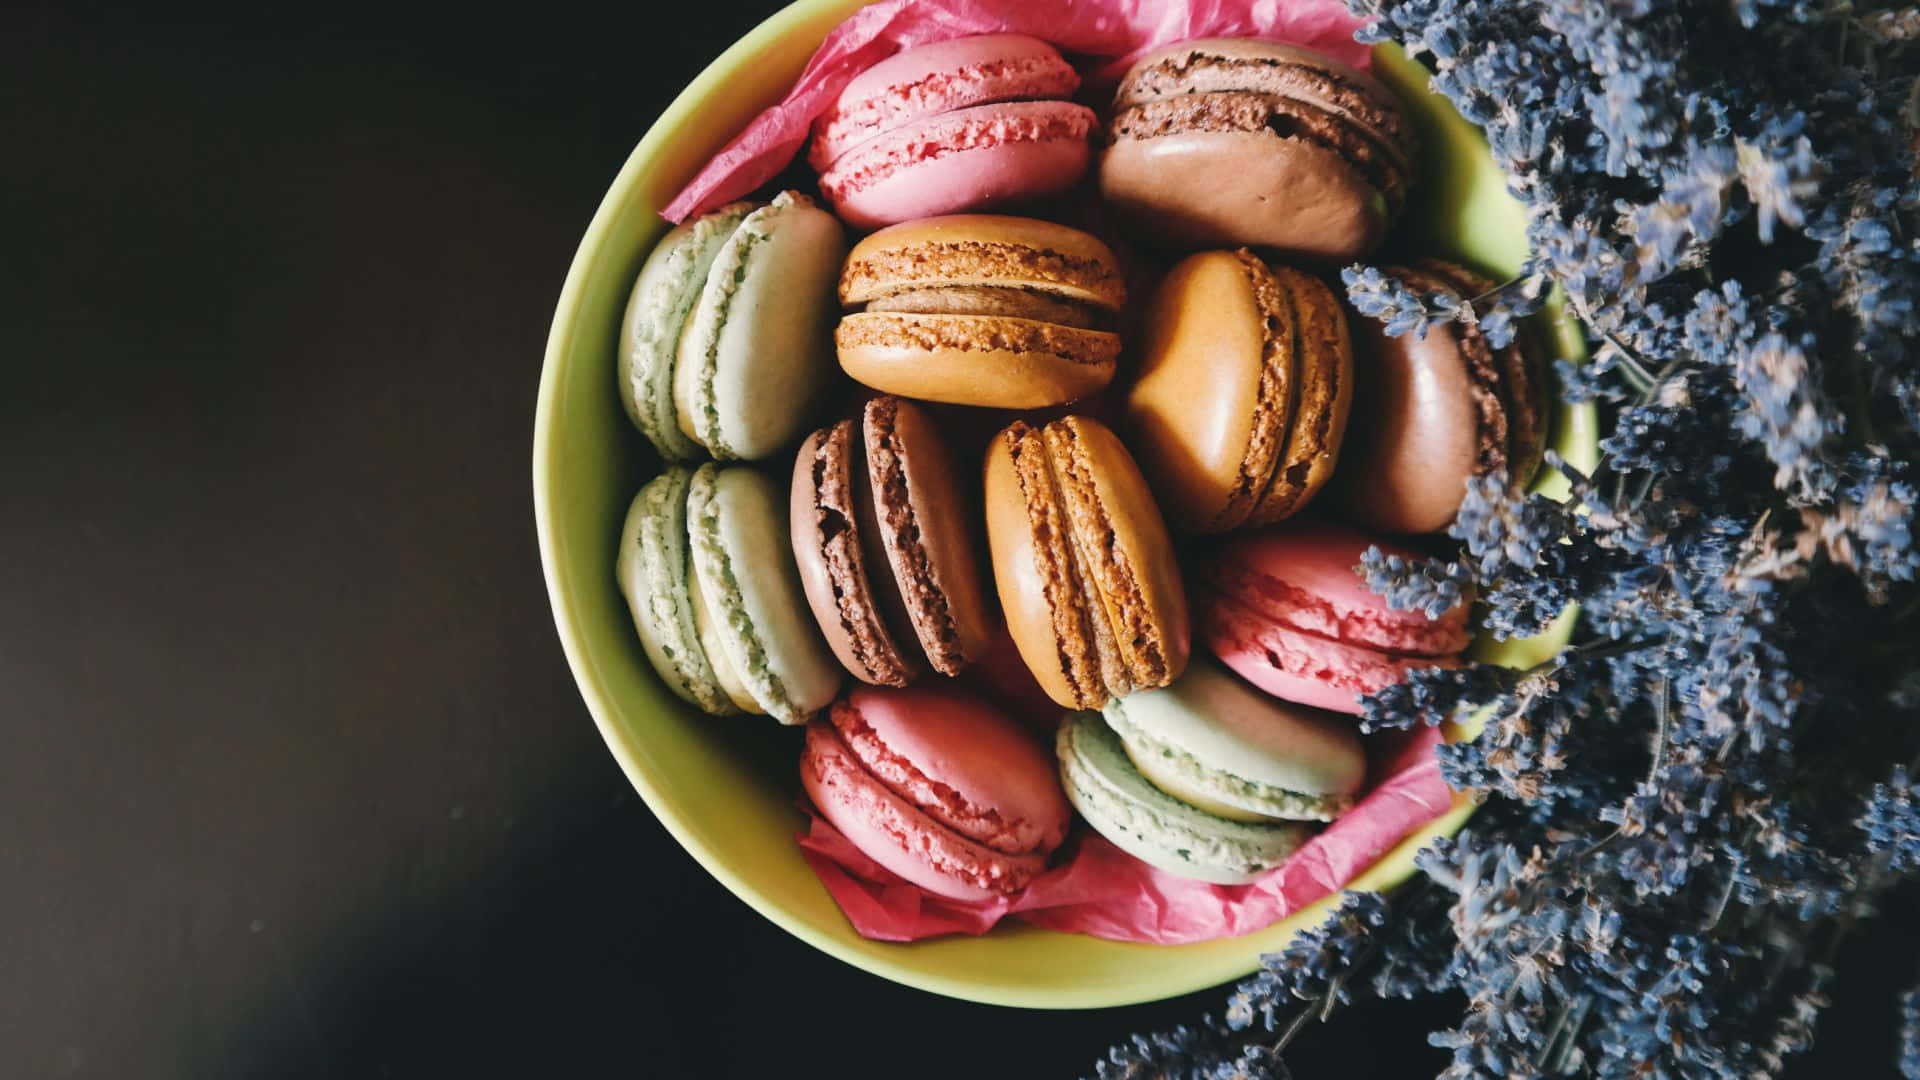 Yummy Macaroons In A Bowl Wallpaper